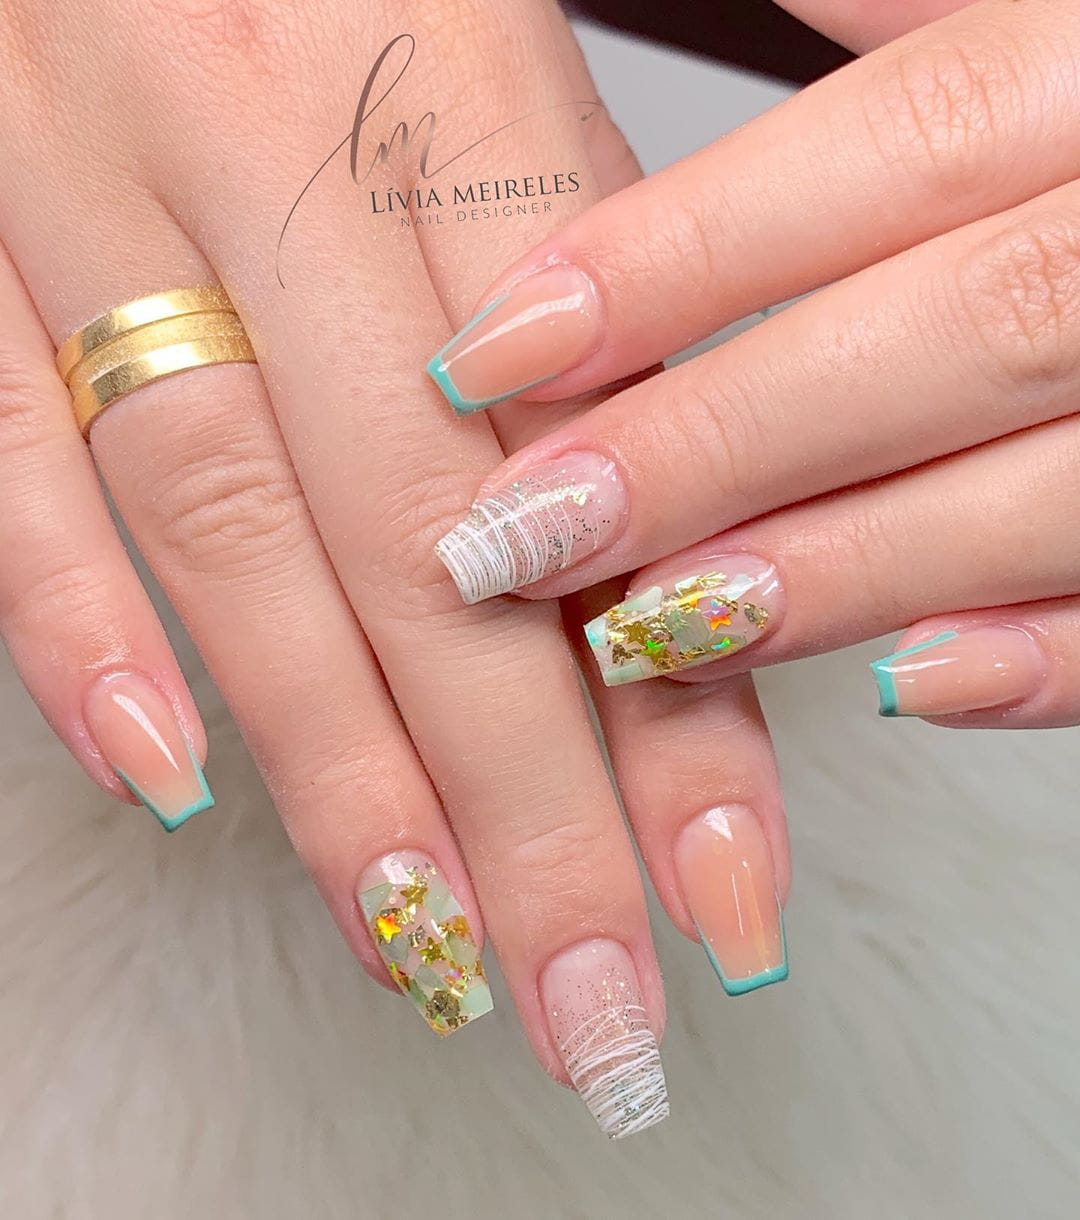 Over 100 Bright Summer Nail Art Designs That Will Be So Trendy images 36